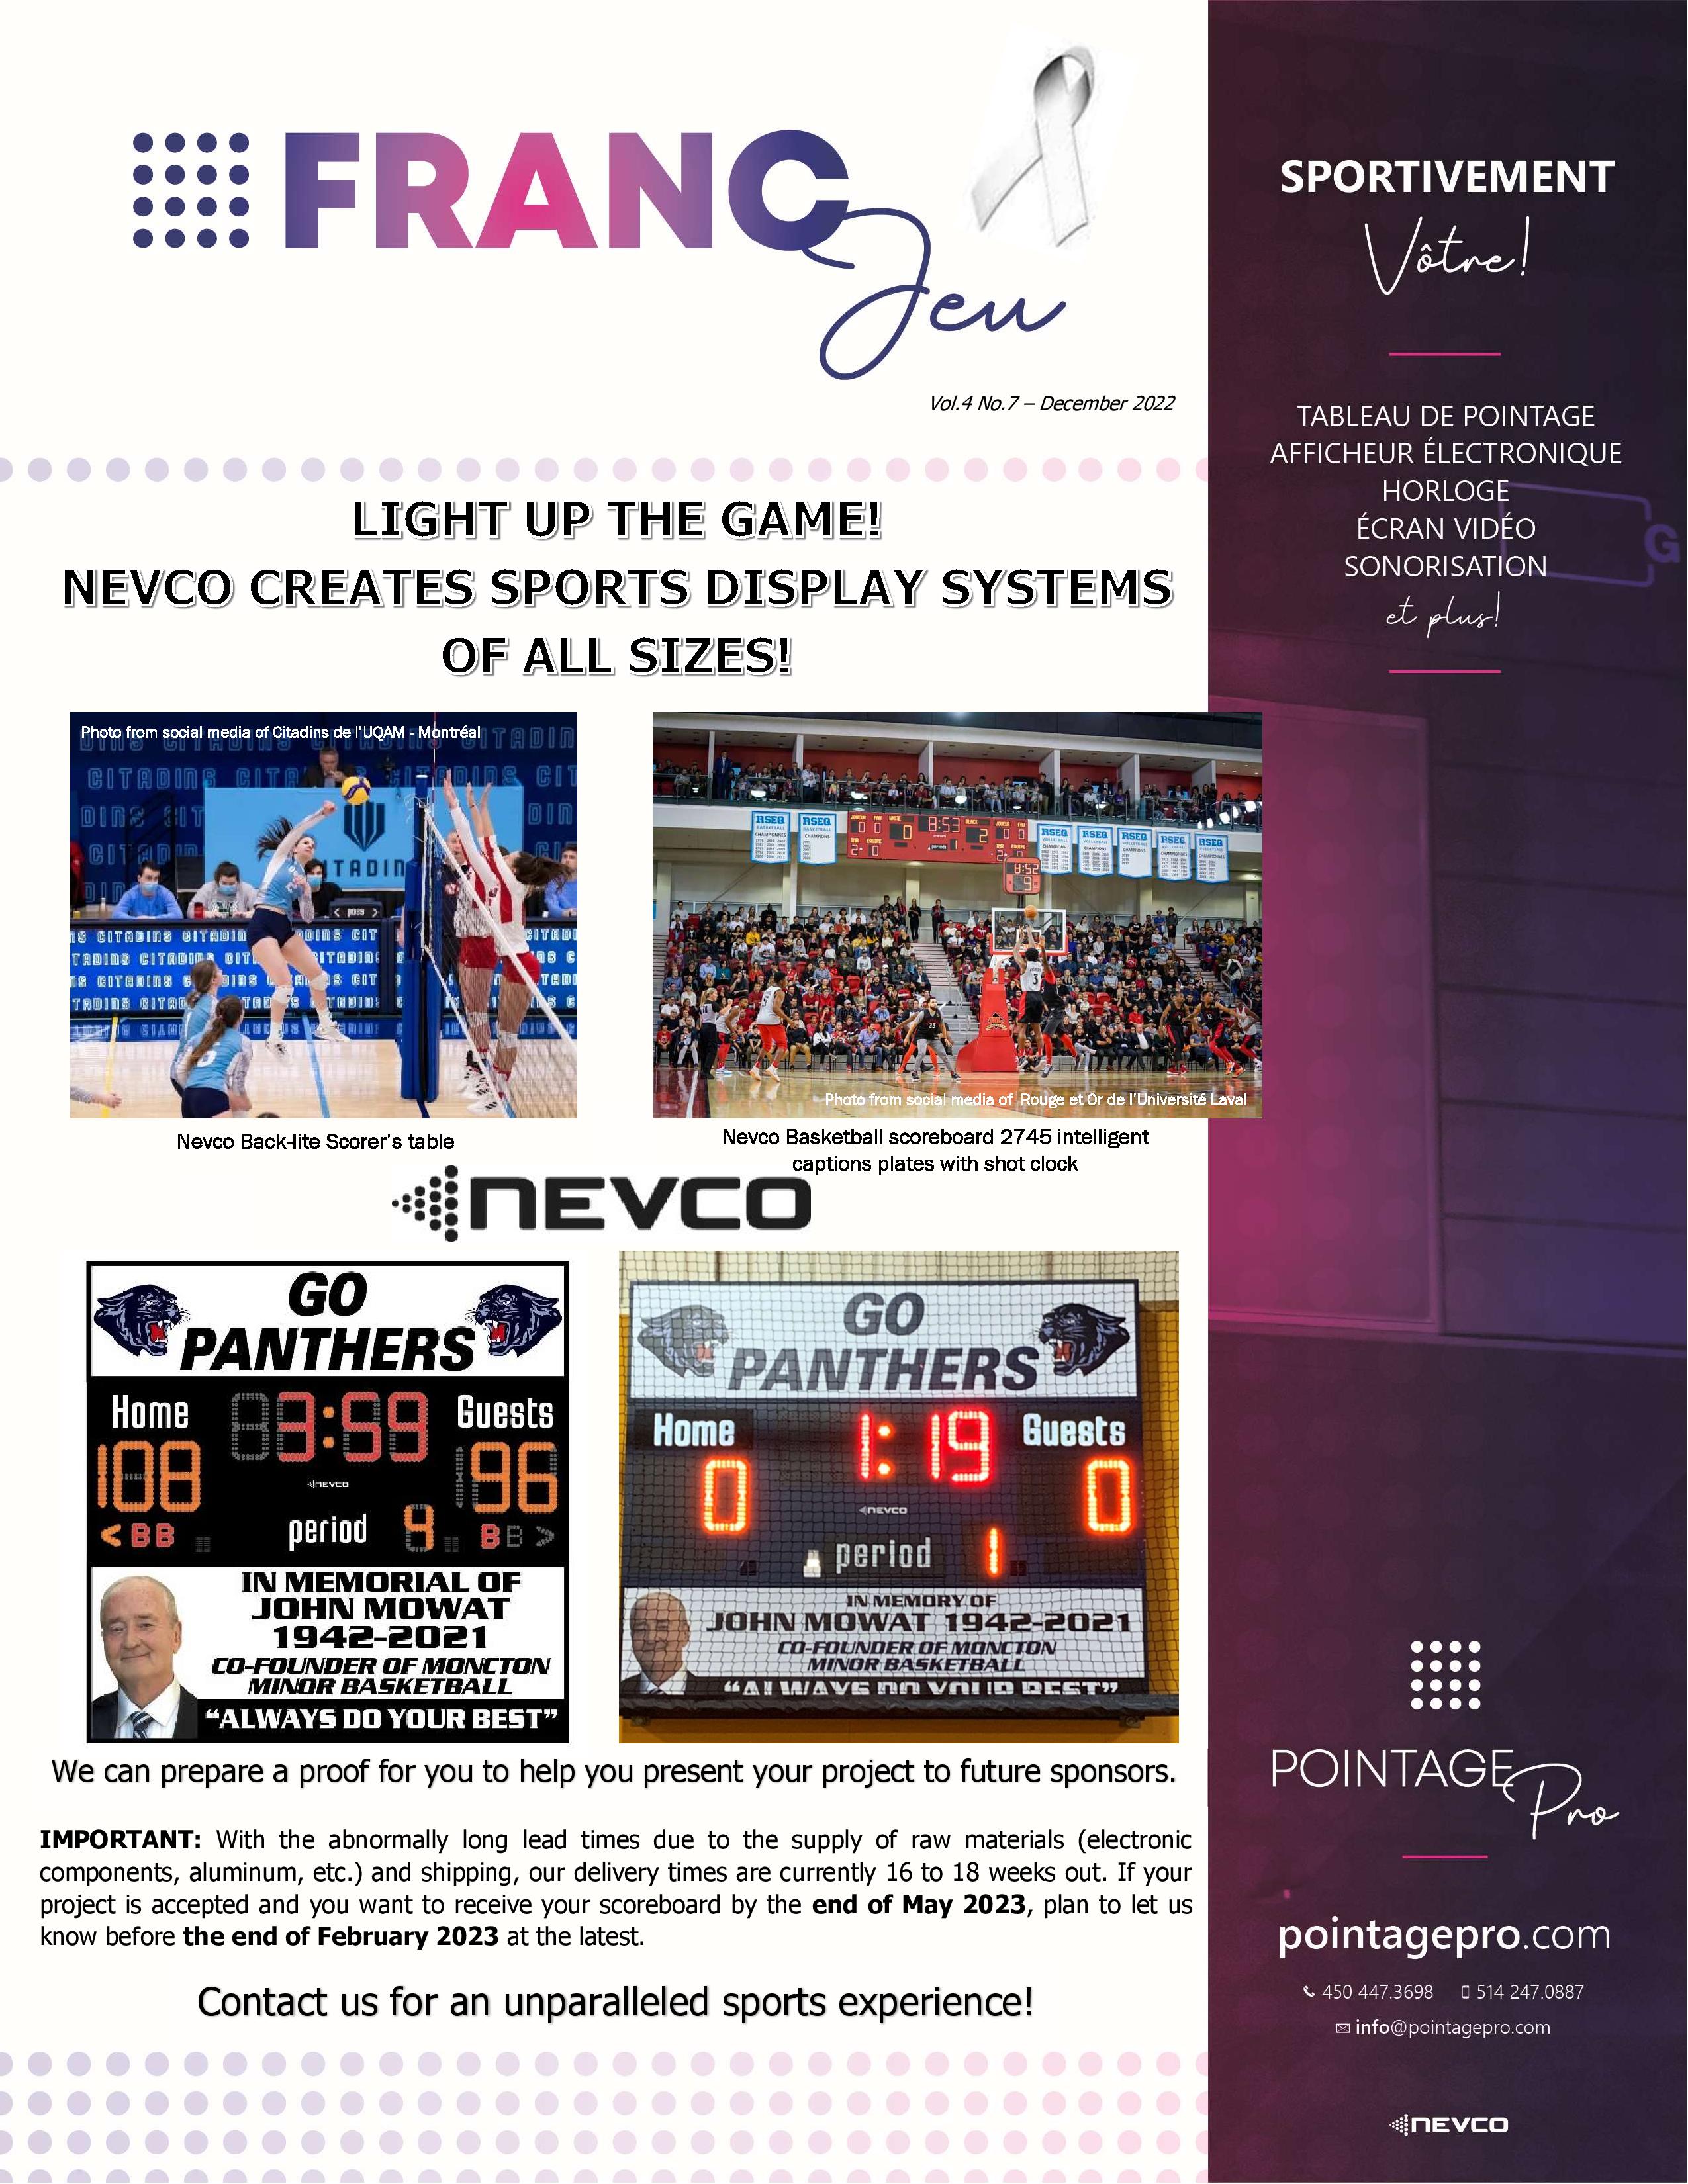 Light up your basketball or volleyball game with a Nevco Scoreboard